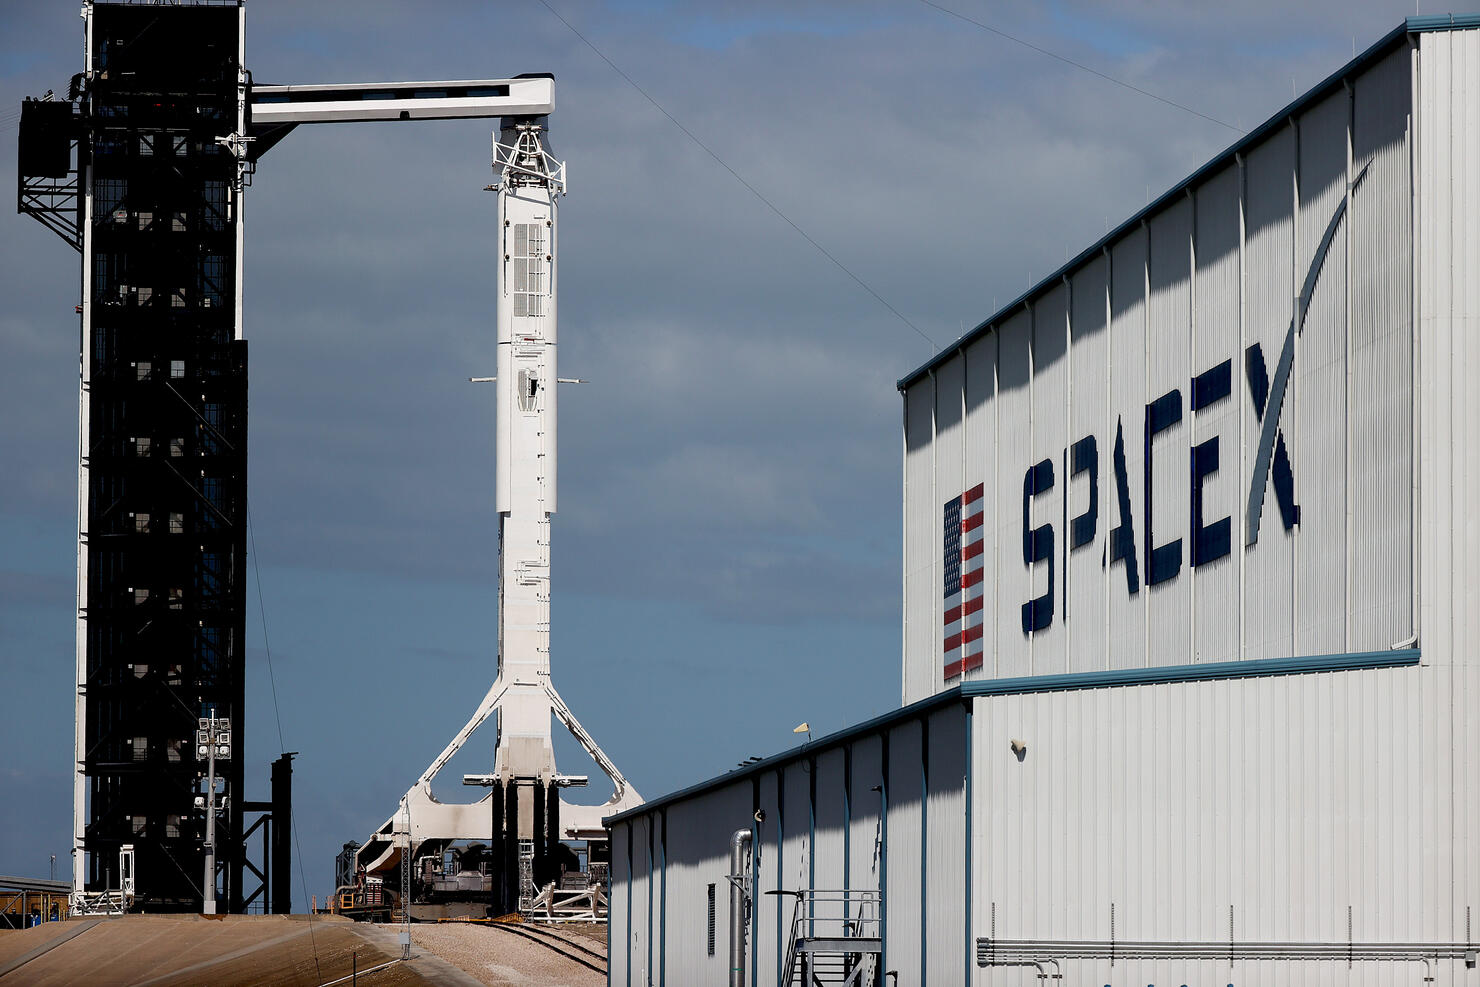 SpaceX And NASA Prepare To Launch SpaceX's Crew-3 Mission To The International Space Station